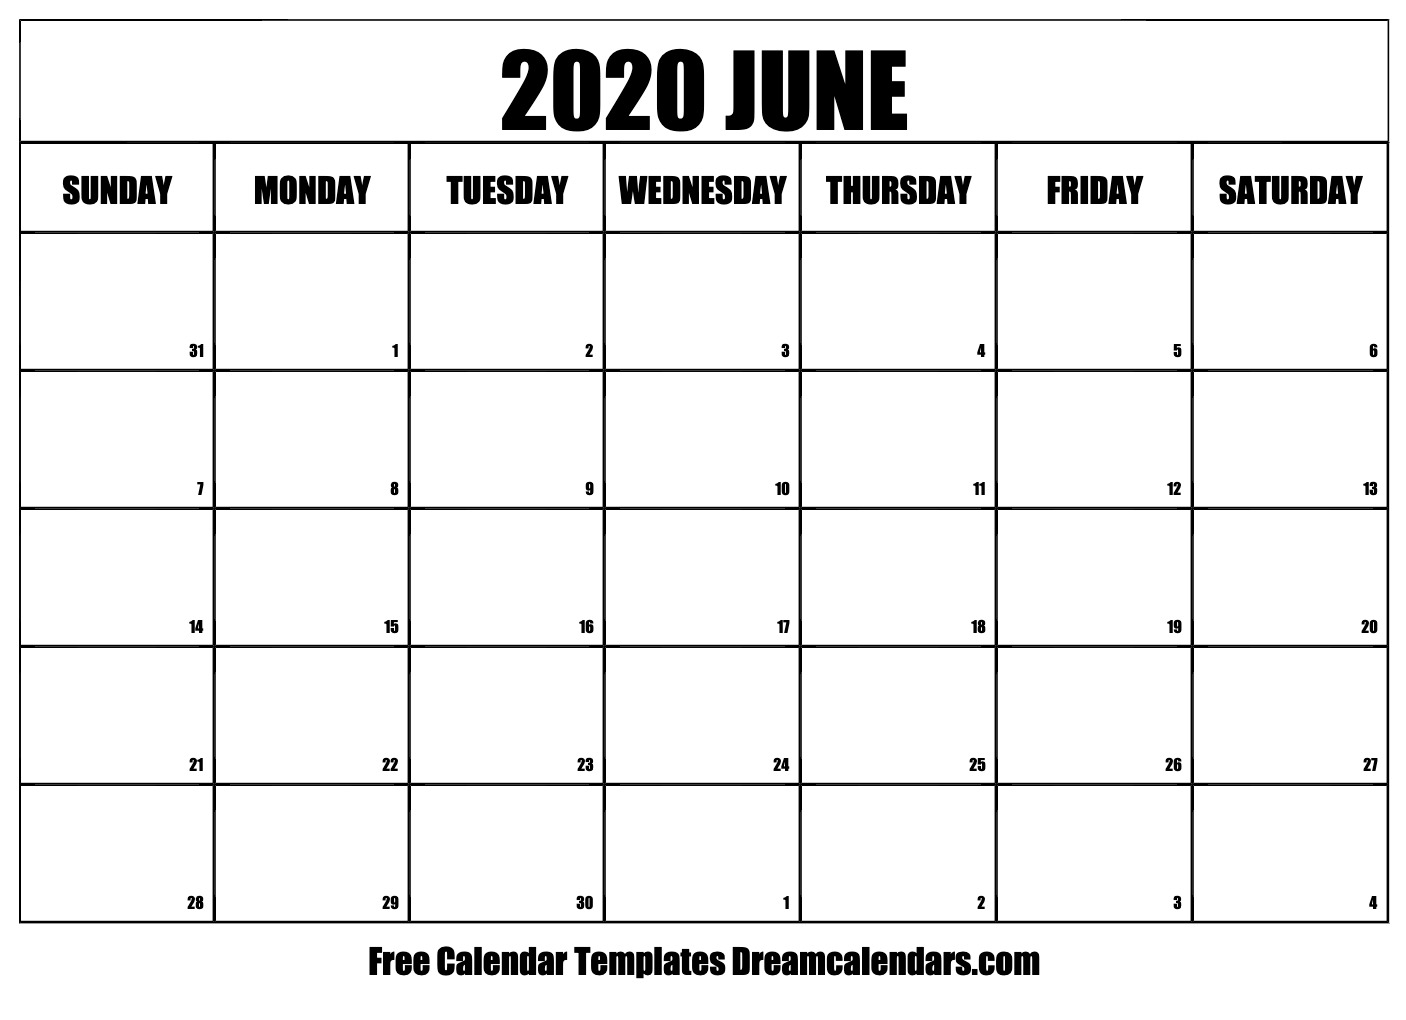 June 2020 Calendar Free Printable With Holidays And Observances 1088